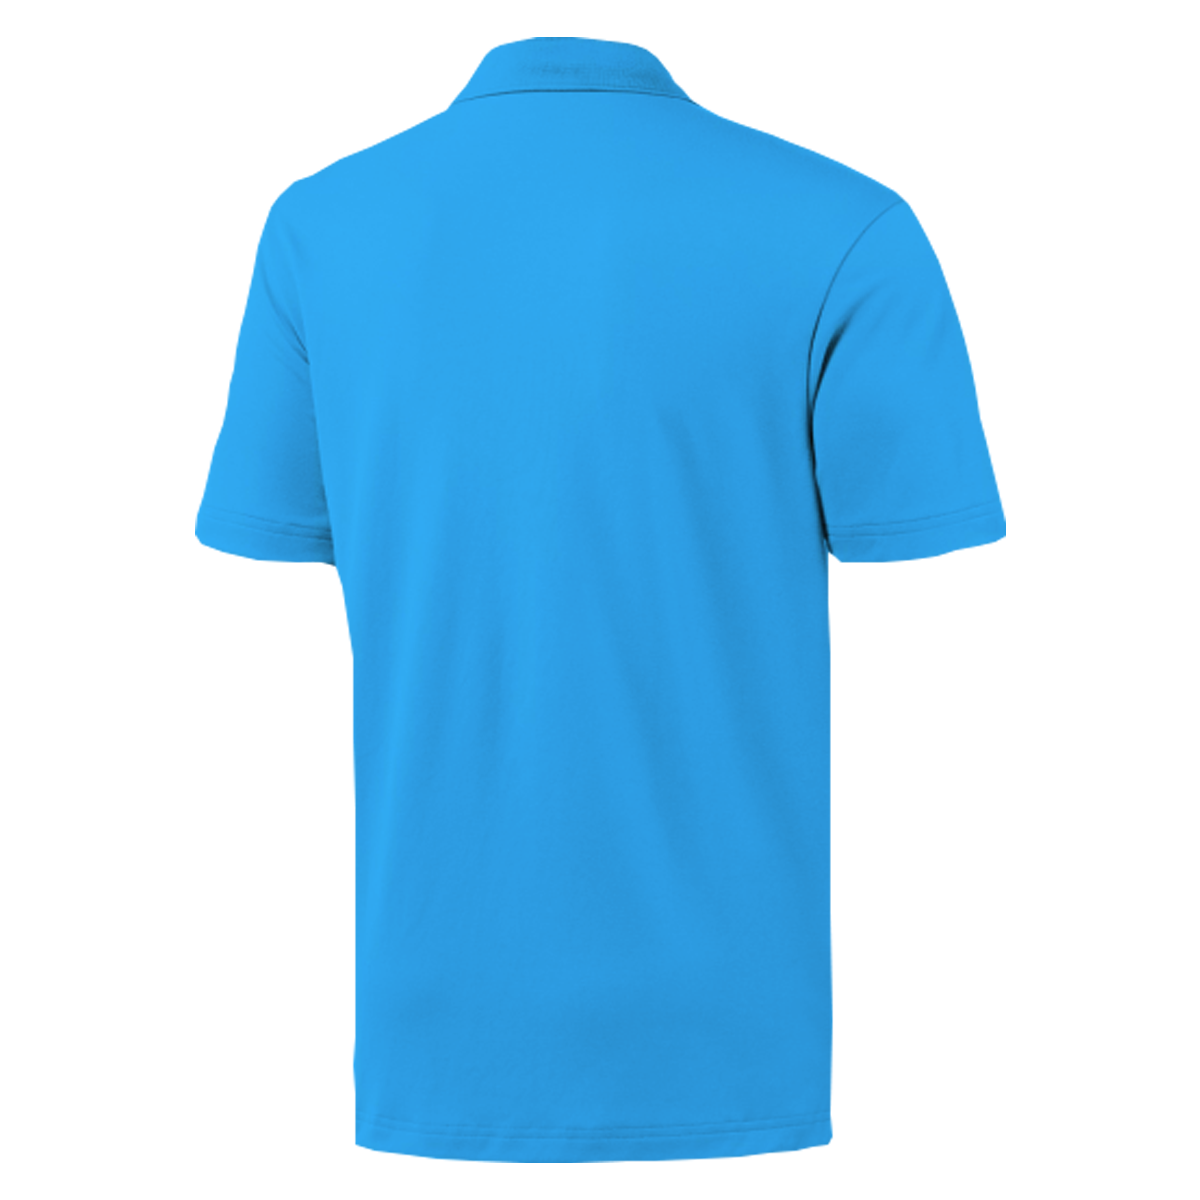 sky blue shirt online,Save up to 19%,www.syncro-system.bg